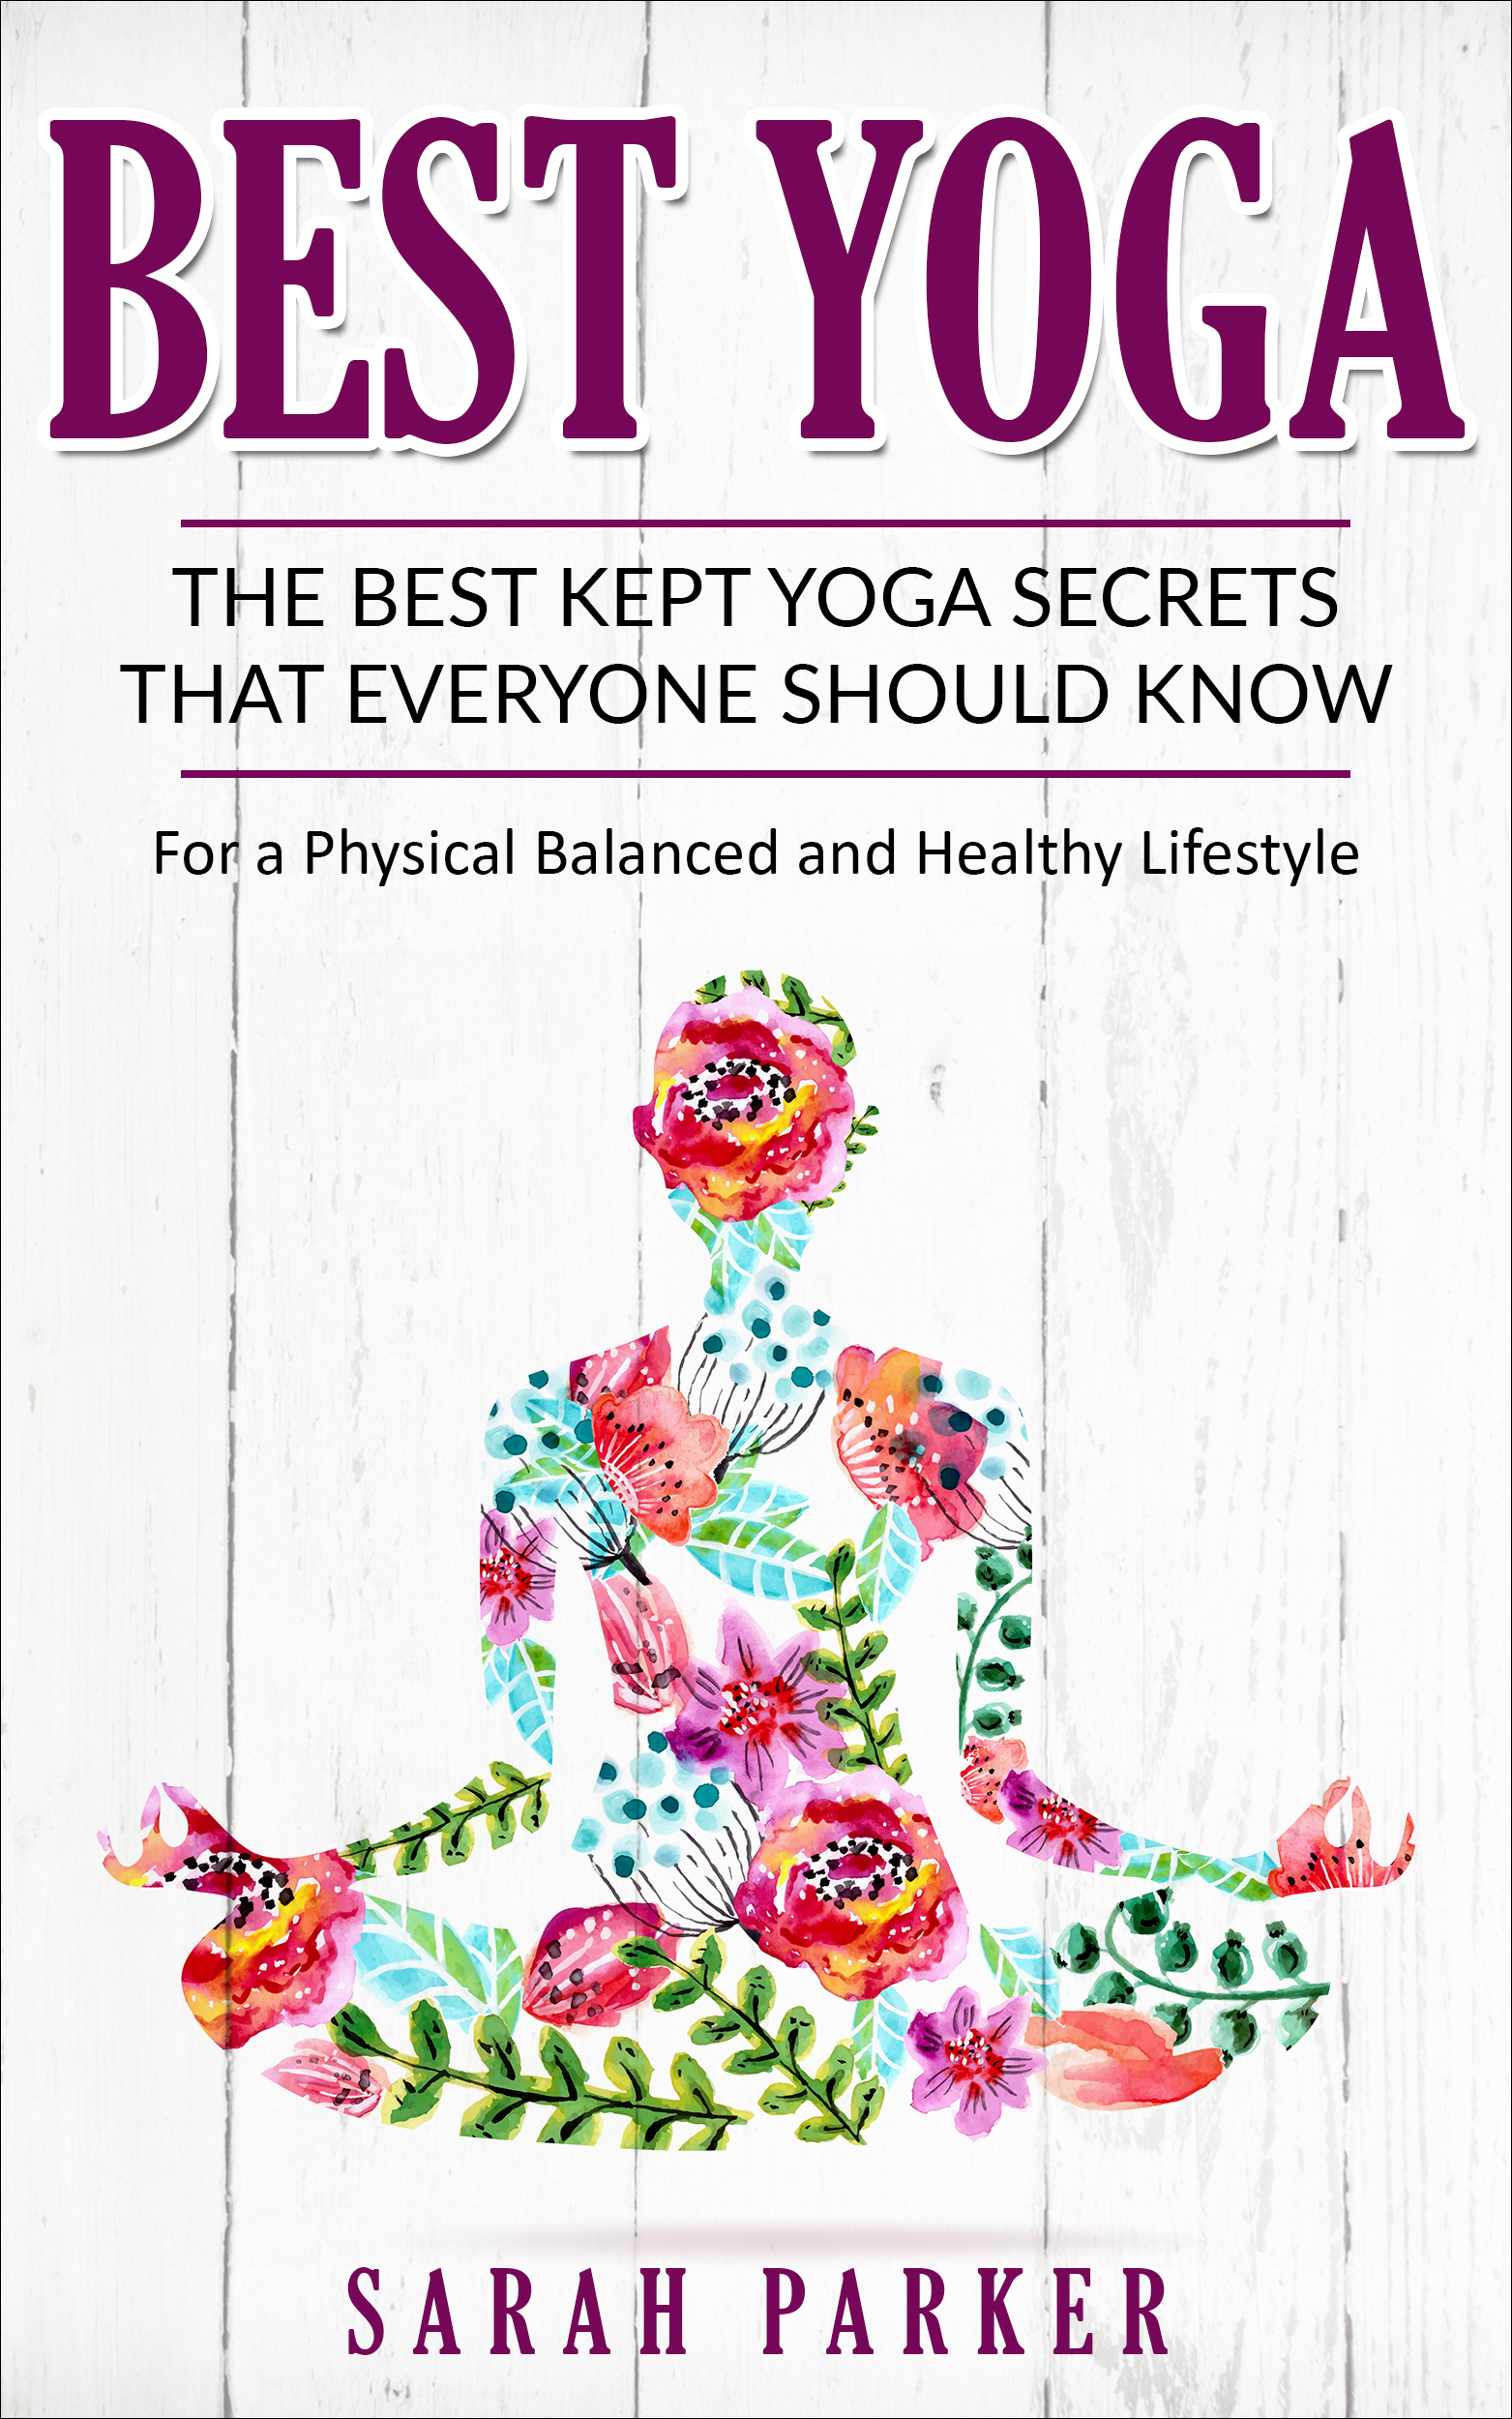 FREE: Best Yoga: The Best Kept Yoga Secrets That Everyone Should Know For a Fhysical Balanced and Healthy Lifestyle  by Sarah Parker